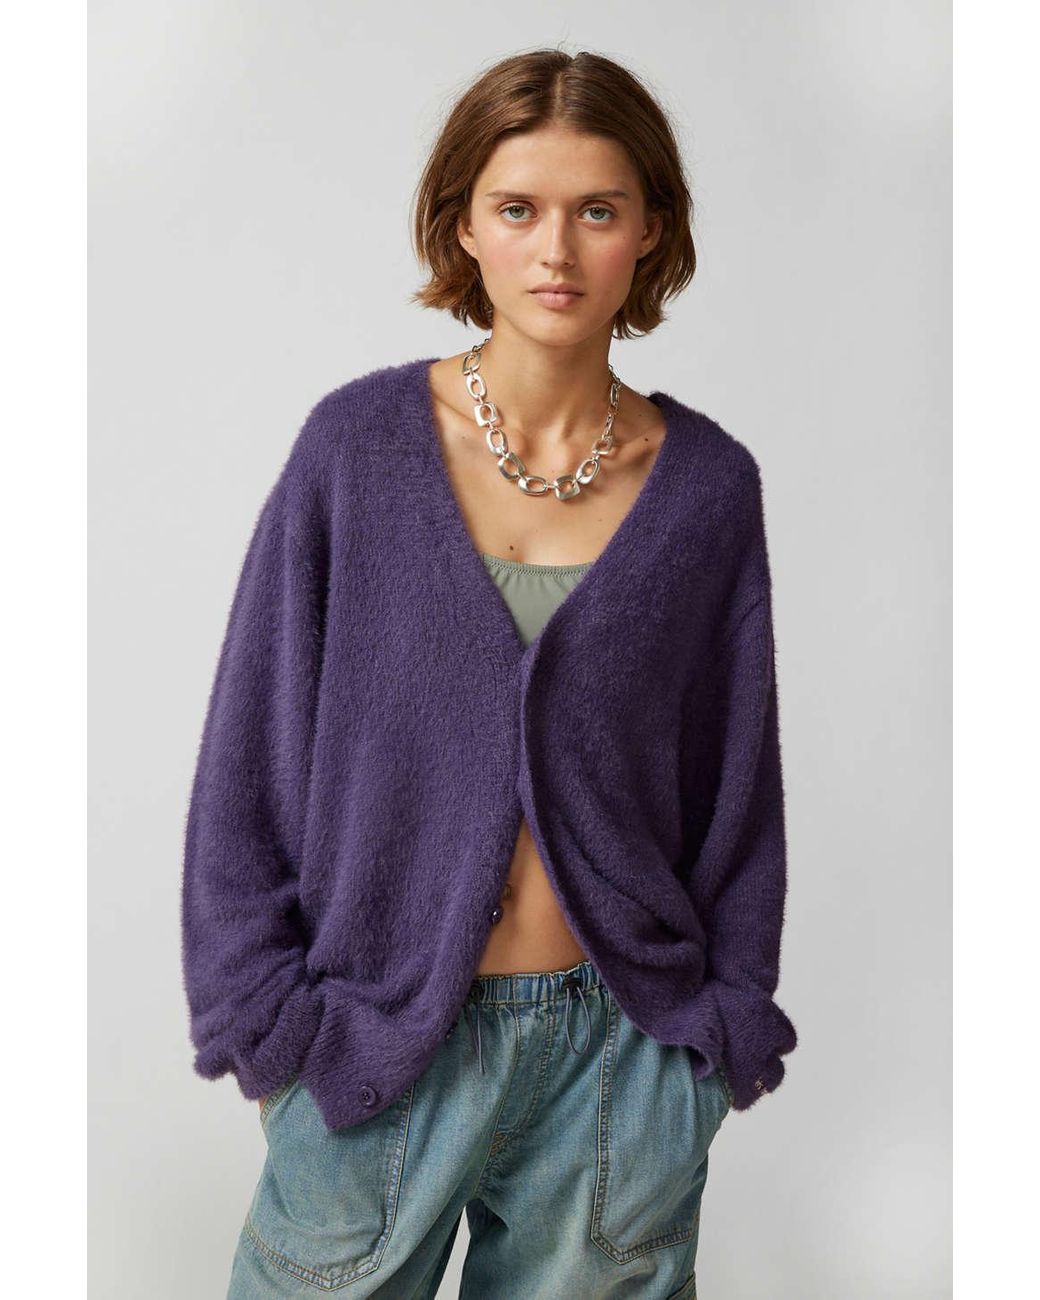 | Outfitters Urban Purple Lyst Eyelash frans... At In iets Cardigan